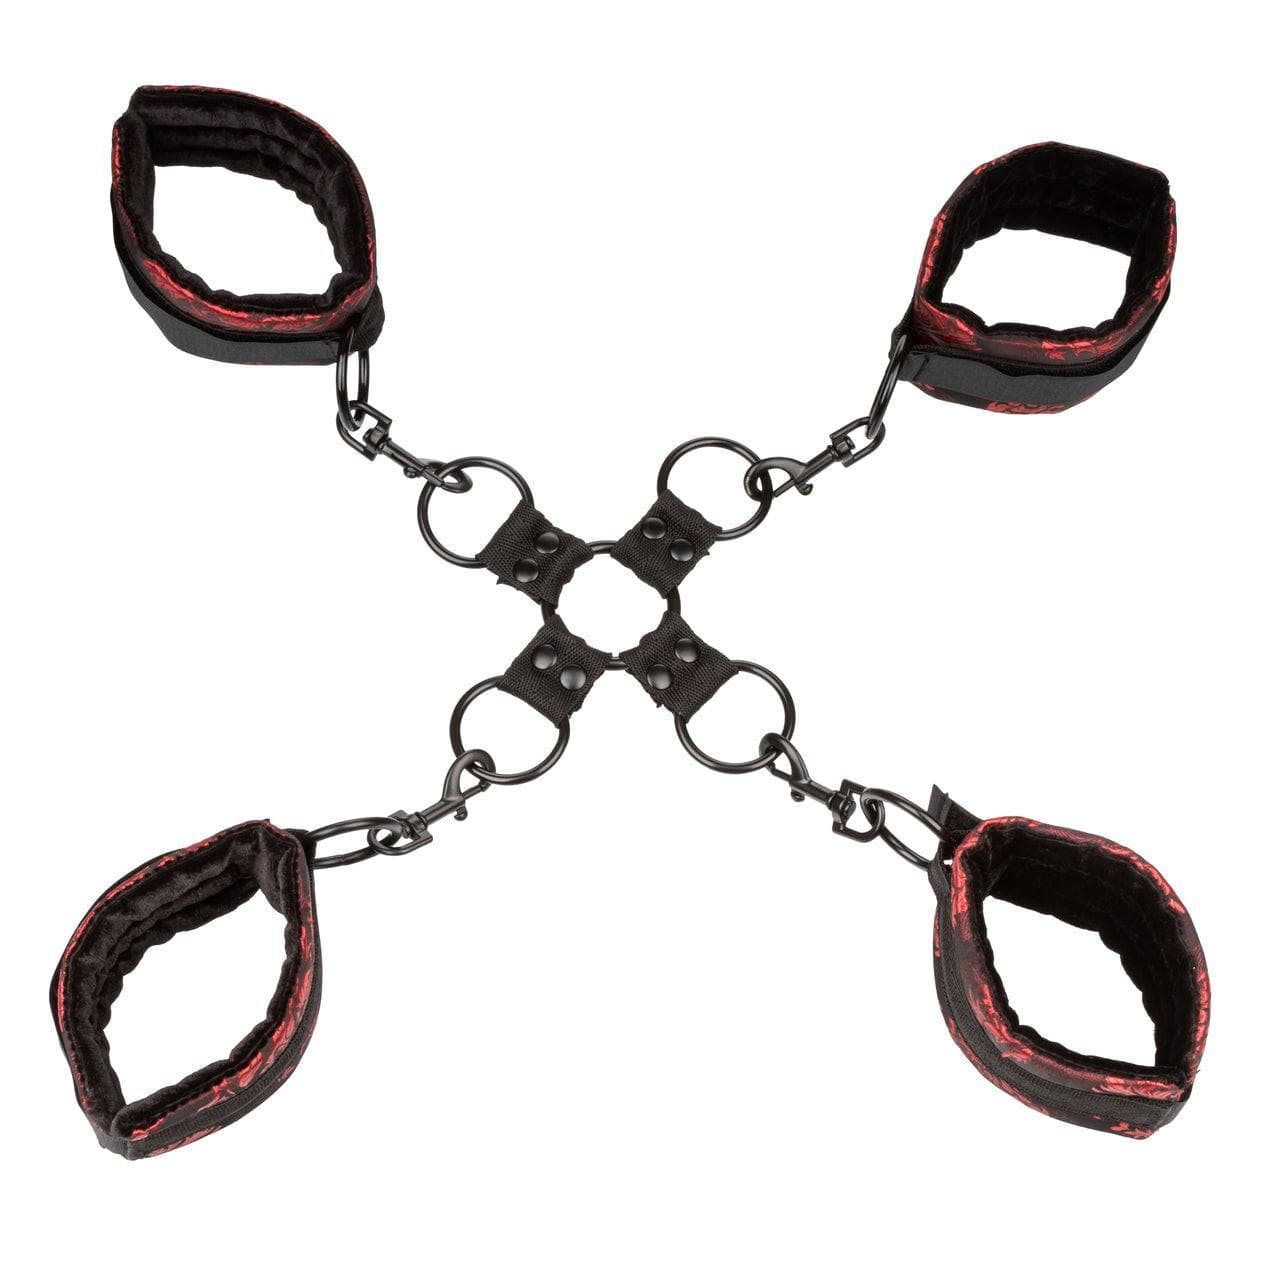 Scandal Hog Tie Restraint for Couples Erotic Role Play Red/Black - Romantic Blessings